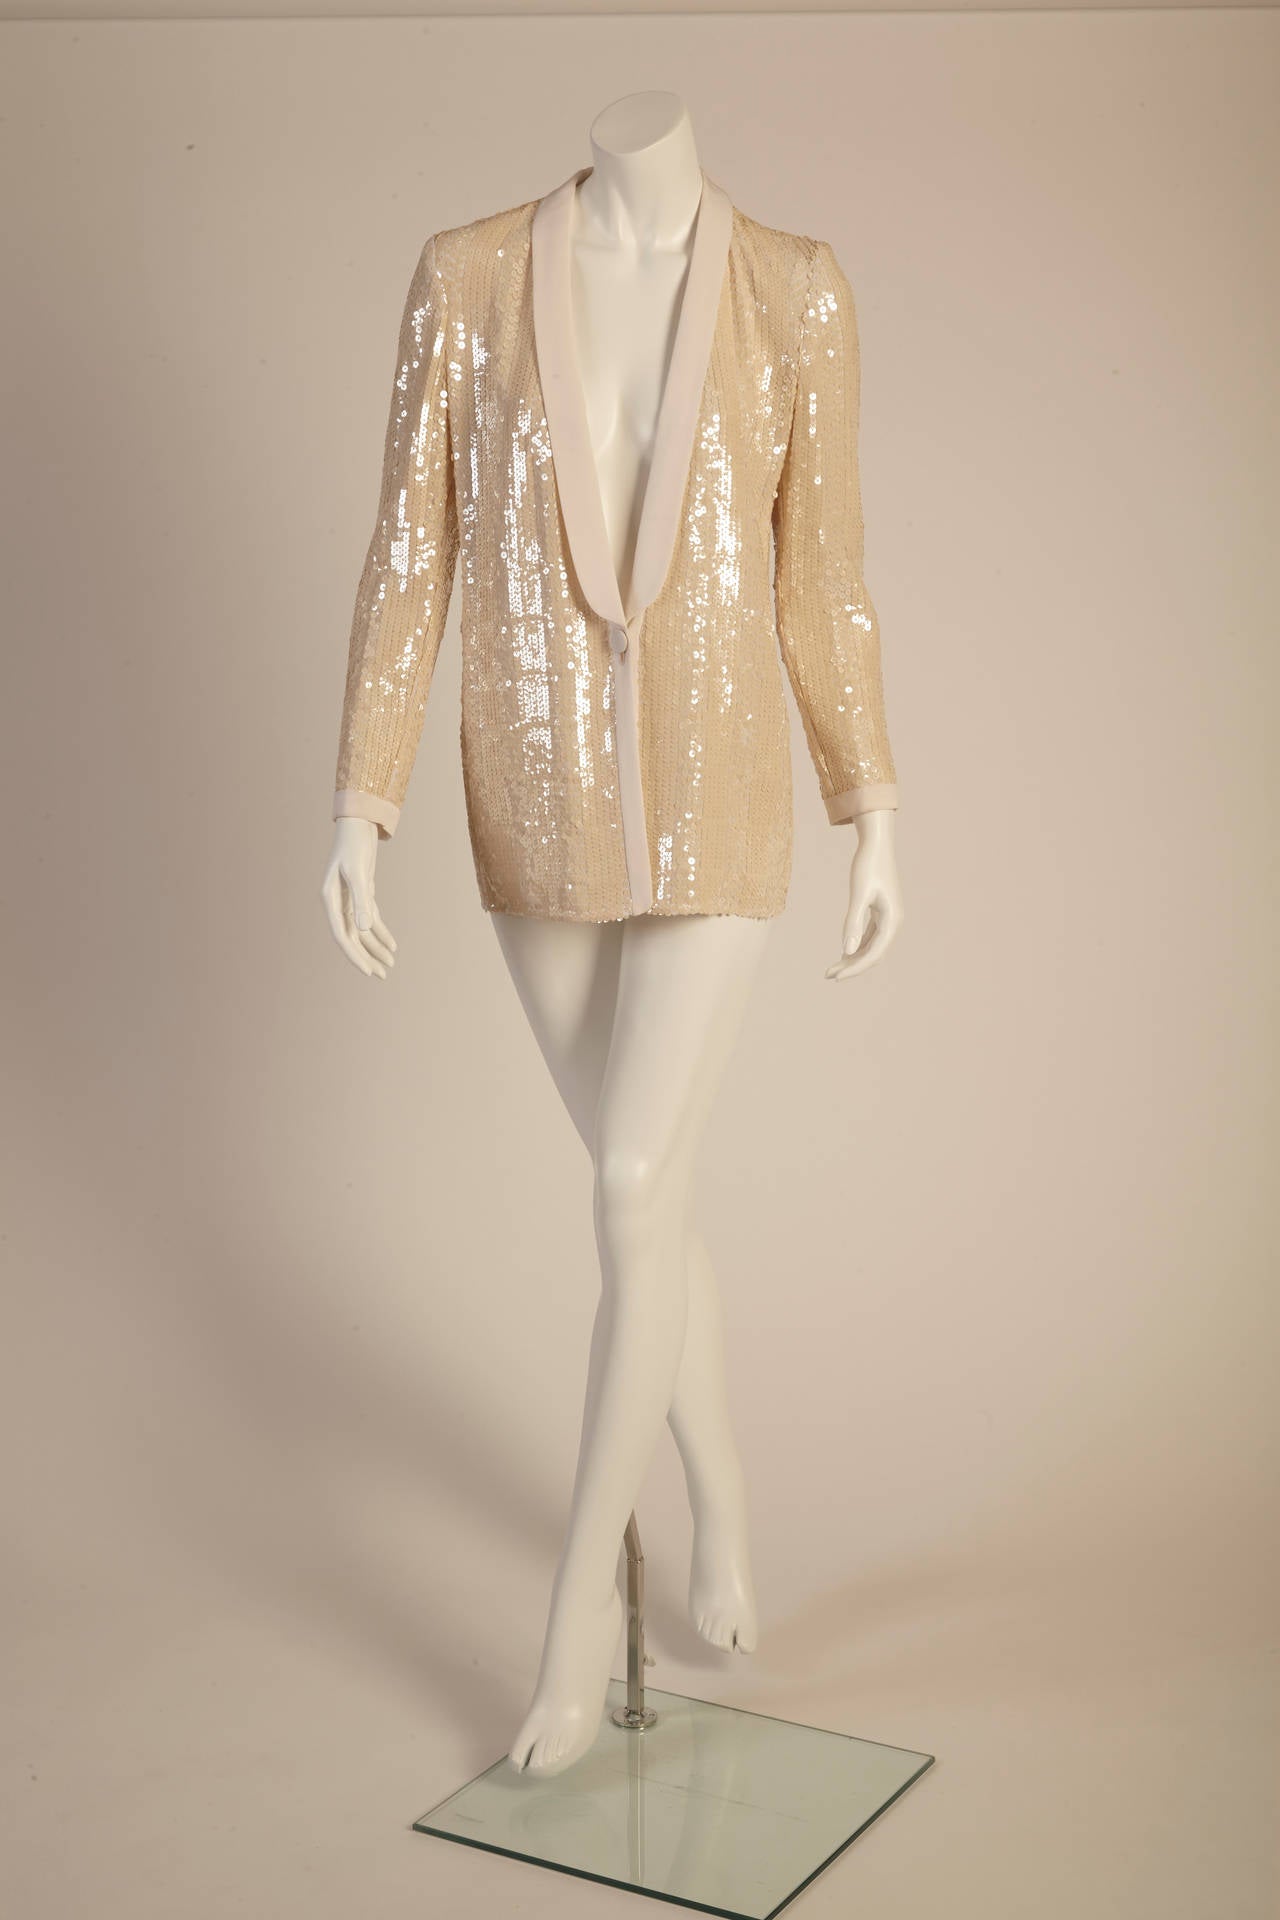 Both refined and glamorous, this dazzling Giorgio Armani Iridescent pearl sequin jacket is perfect for your next big event. Silk trim on the collar and sleeves and closes with a single button.  In excellent, barely worn condition.